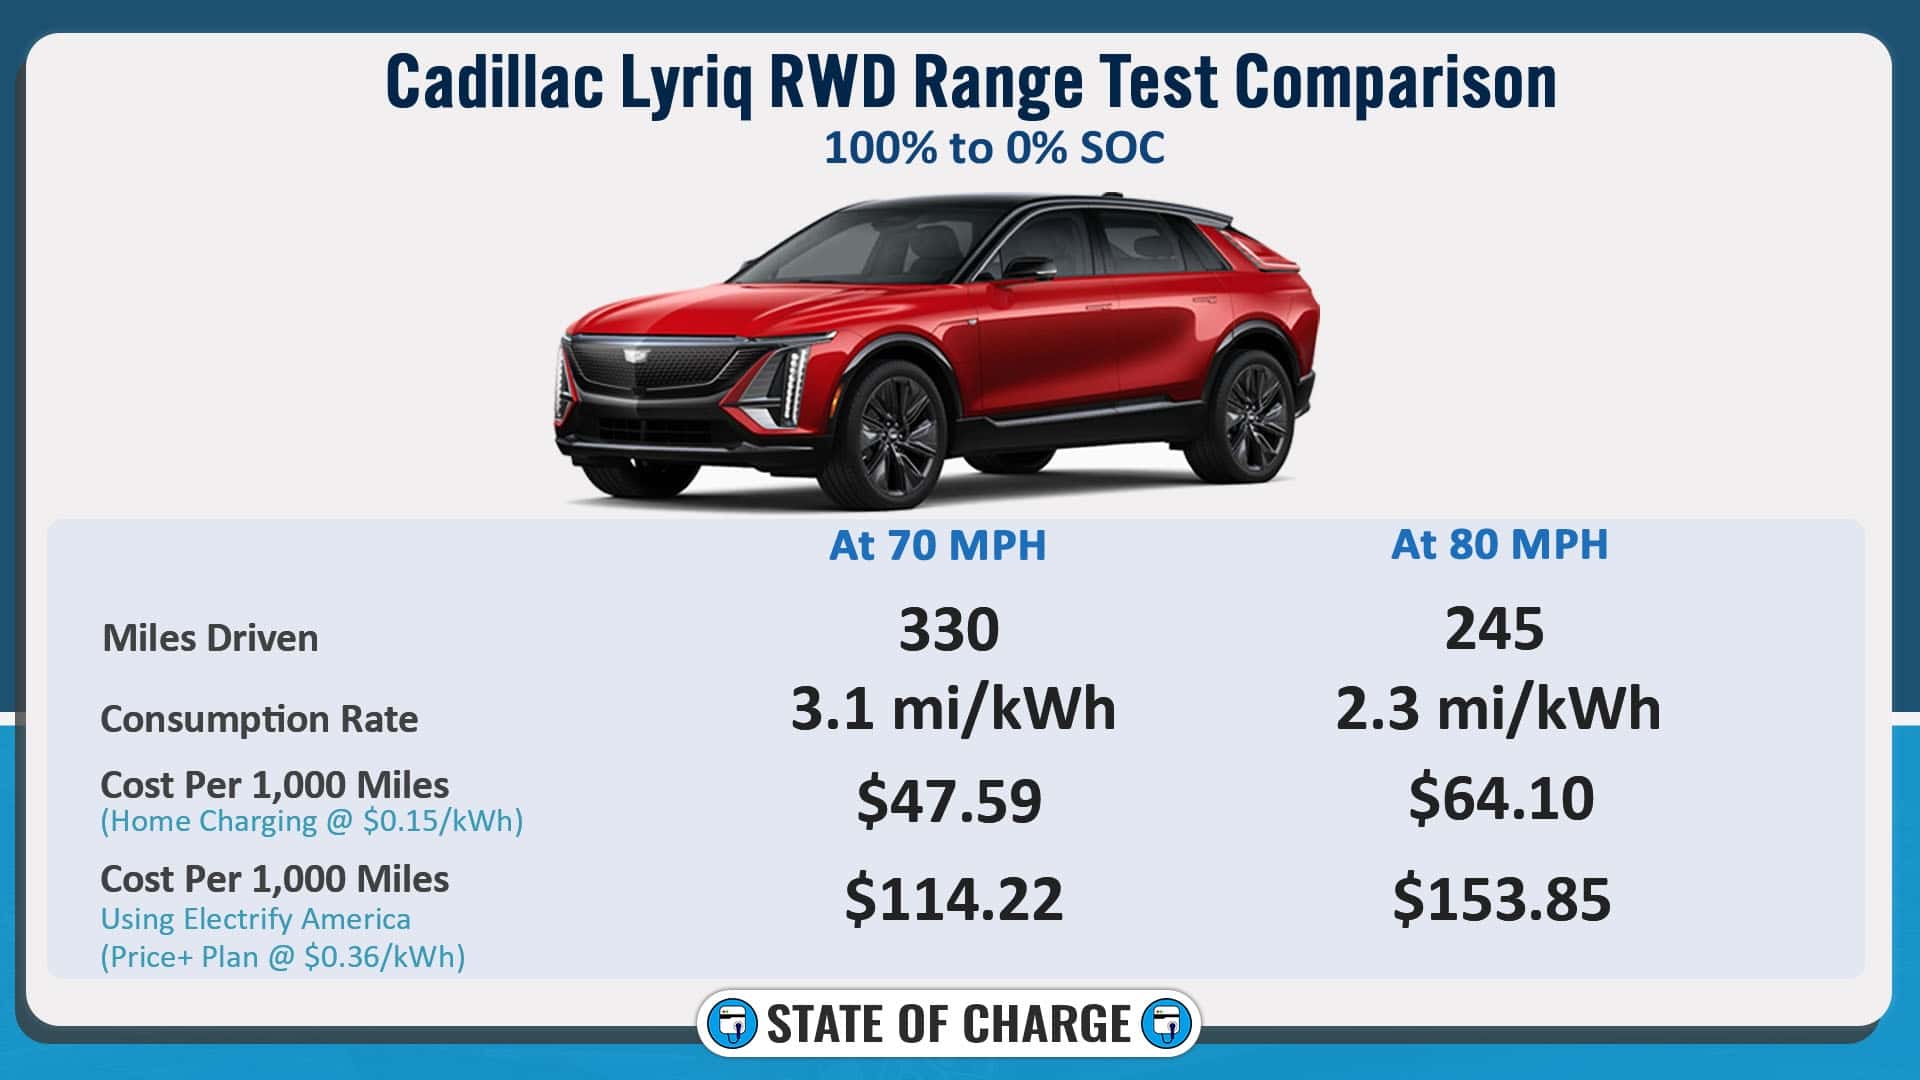 watch how much range loss a cadillac lyriq suffers at 80 mph